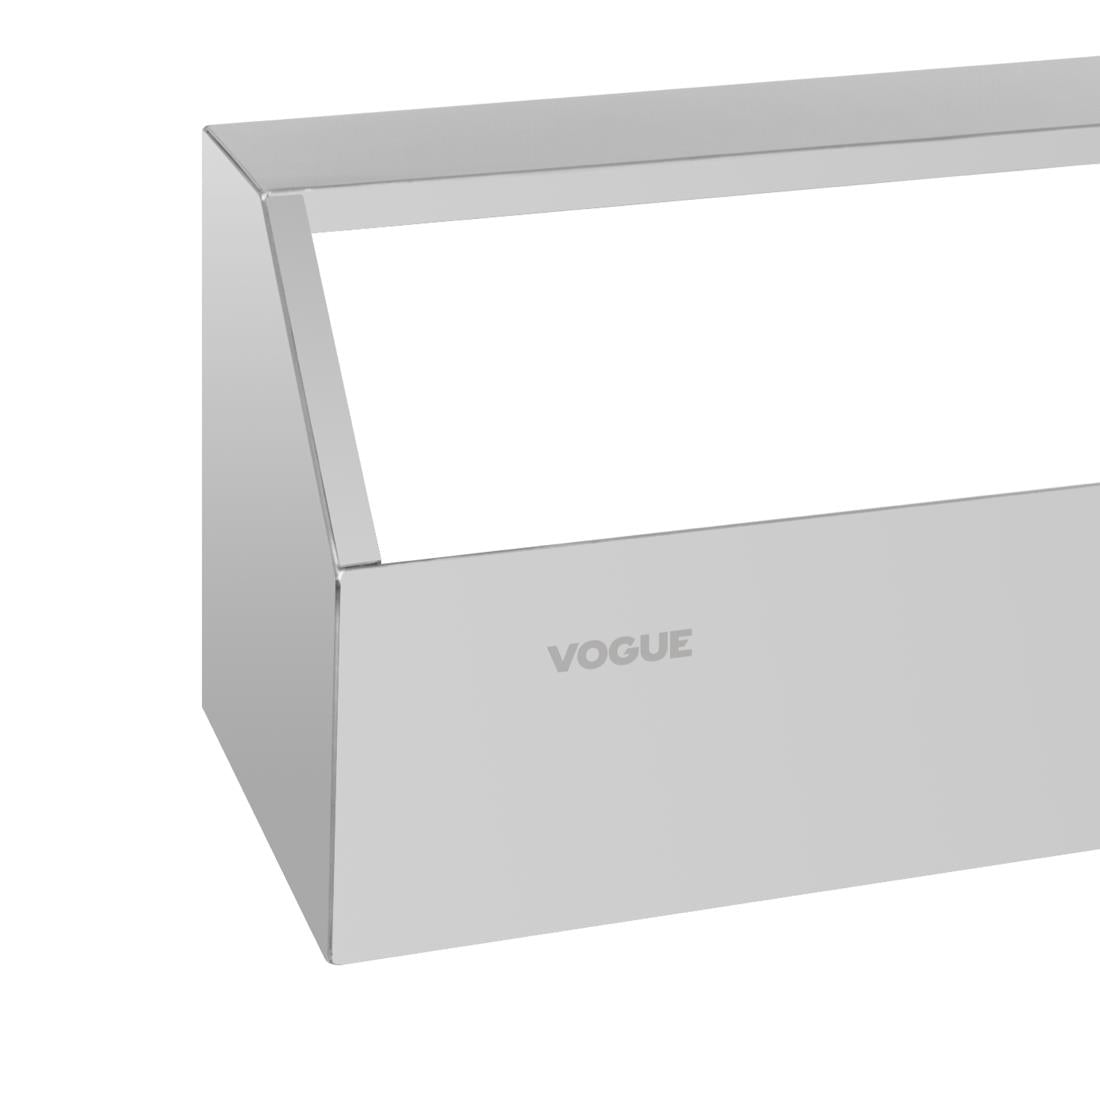 Vogue Stainless Steel Gastronorm Pan Rack Long